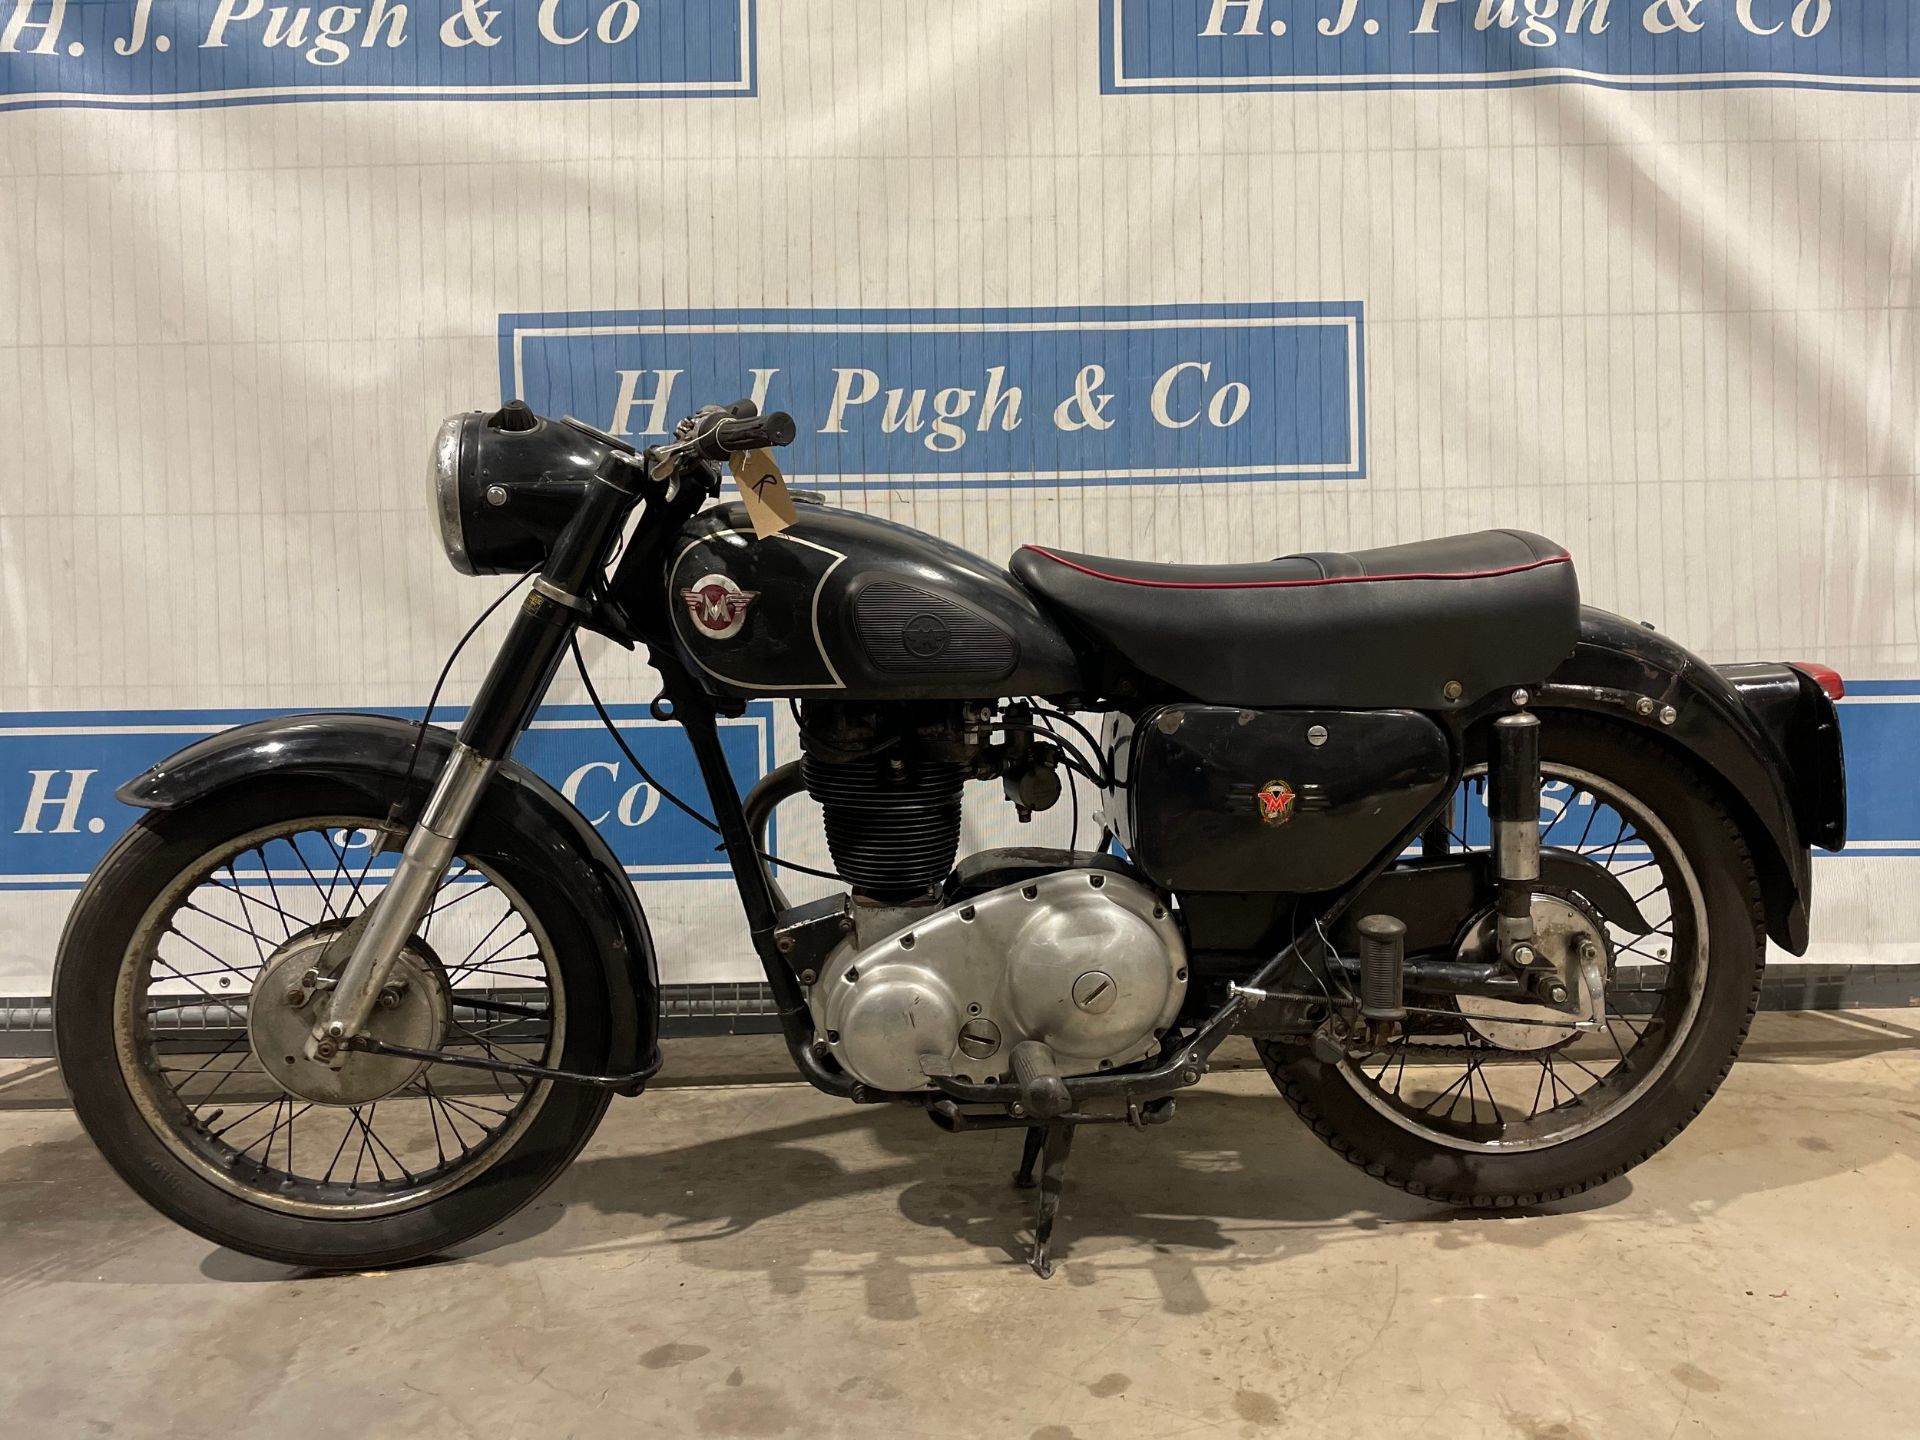 Matchless G3 motorcycle. 1958. 348cc. Has run recently but needs a new clutch. Reg 660 XVU. V5 - Image 12 of 12